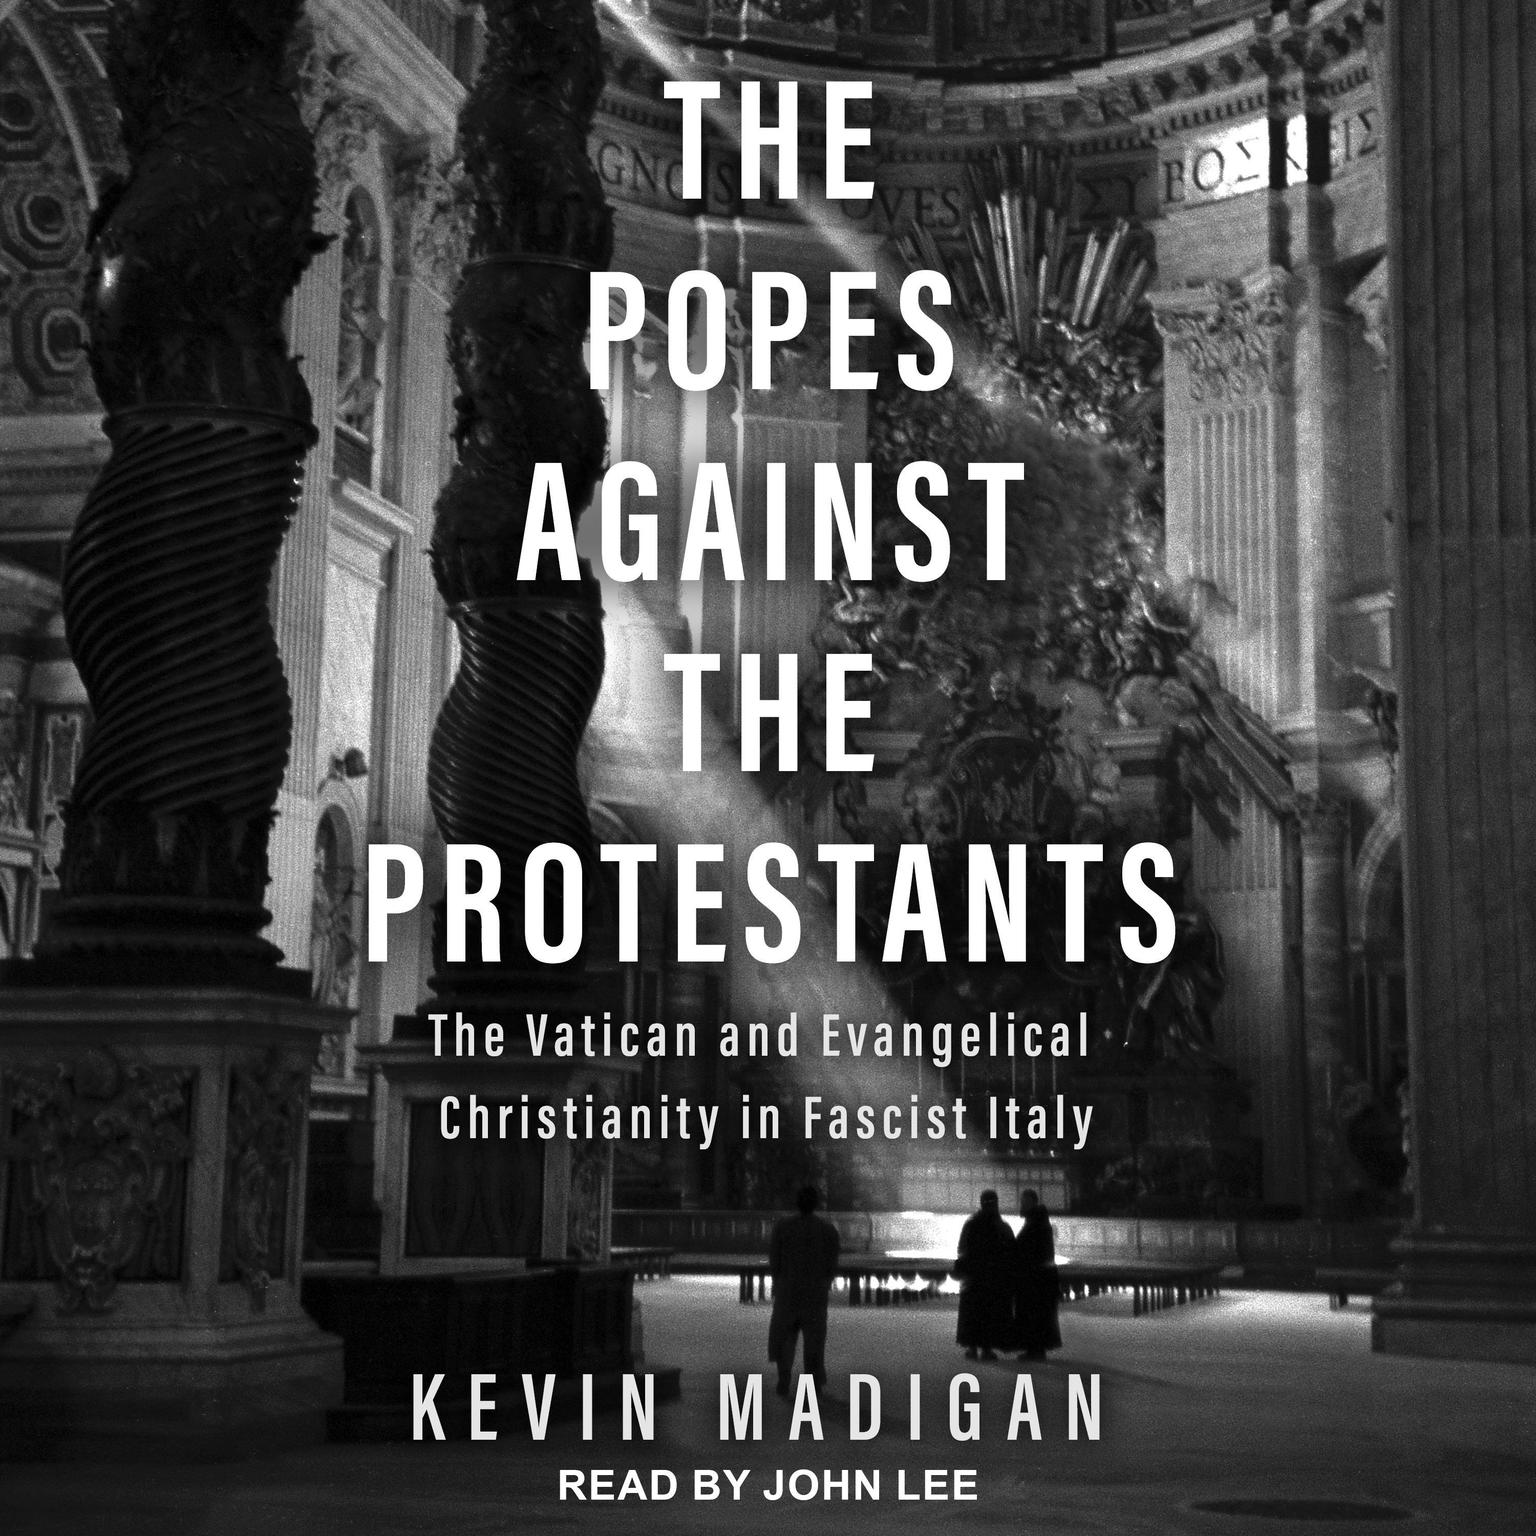 The Popes Against the Protestants: The Vatican and Evangelical Christianity in Fascist Italy Audiobook, by Kevin Madigan